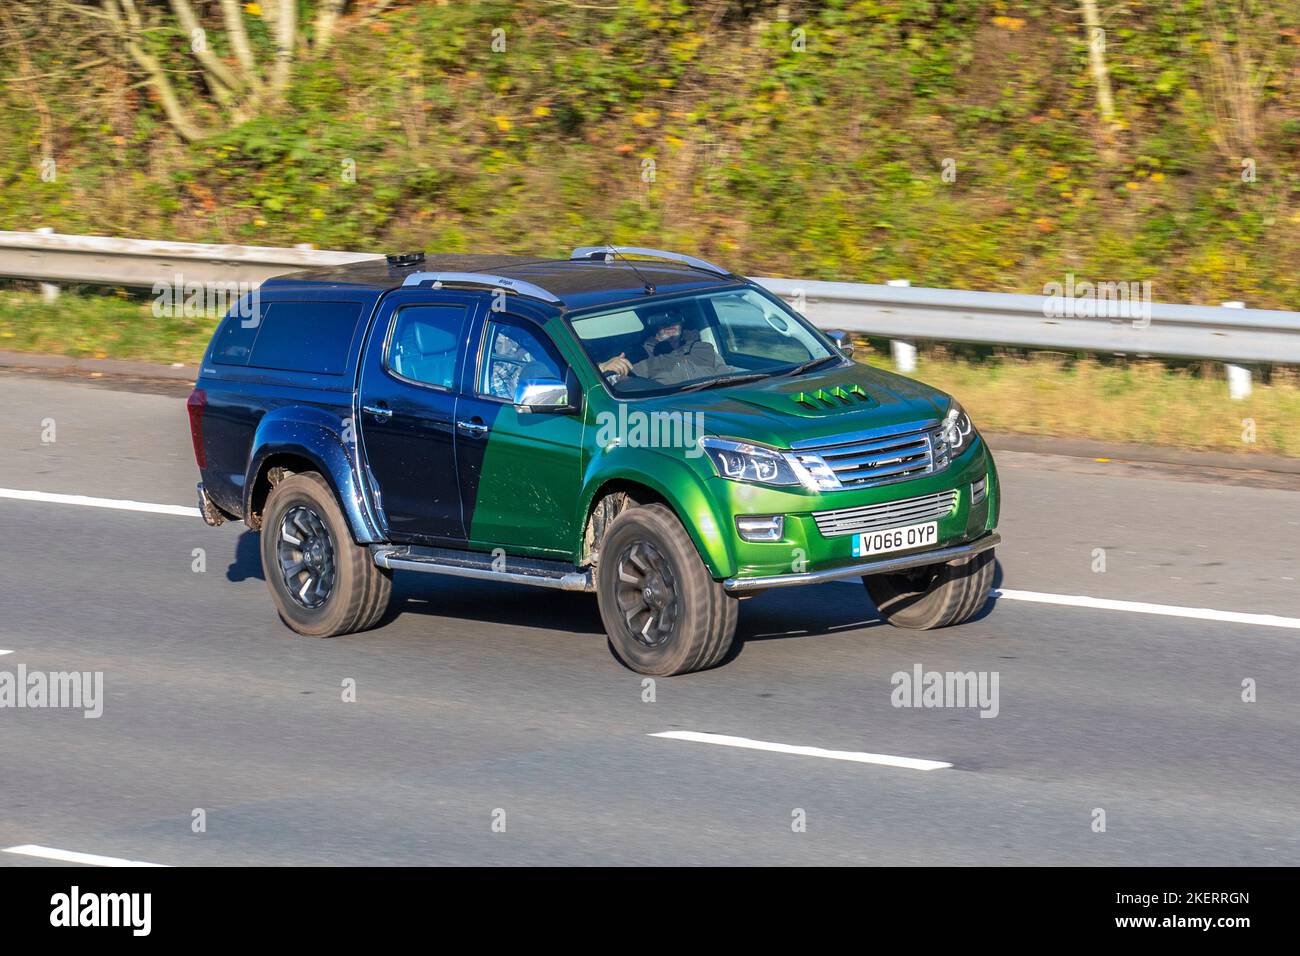 2016 Green Black ISUZU D-MAX TD EIGER DCB 2489cc 5 Speed manual, 2.5 TD Double Cab Pickup 4x4 4dr travelling on the M6 motorway, UK Stock Photo